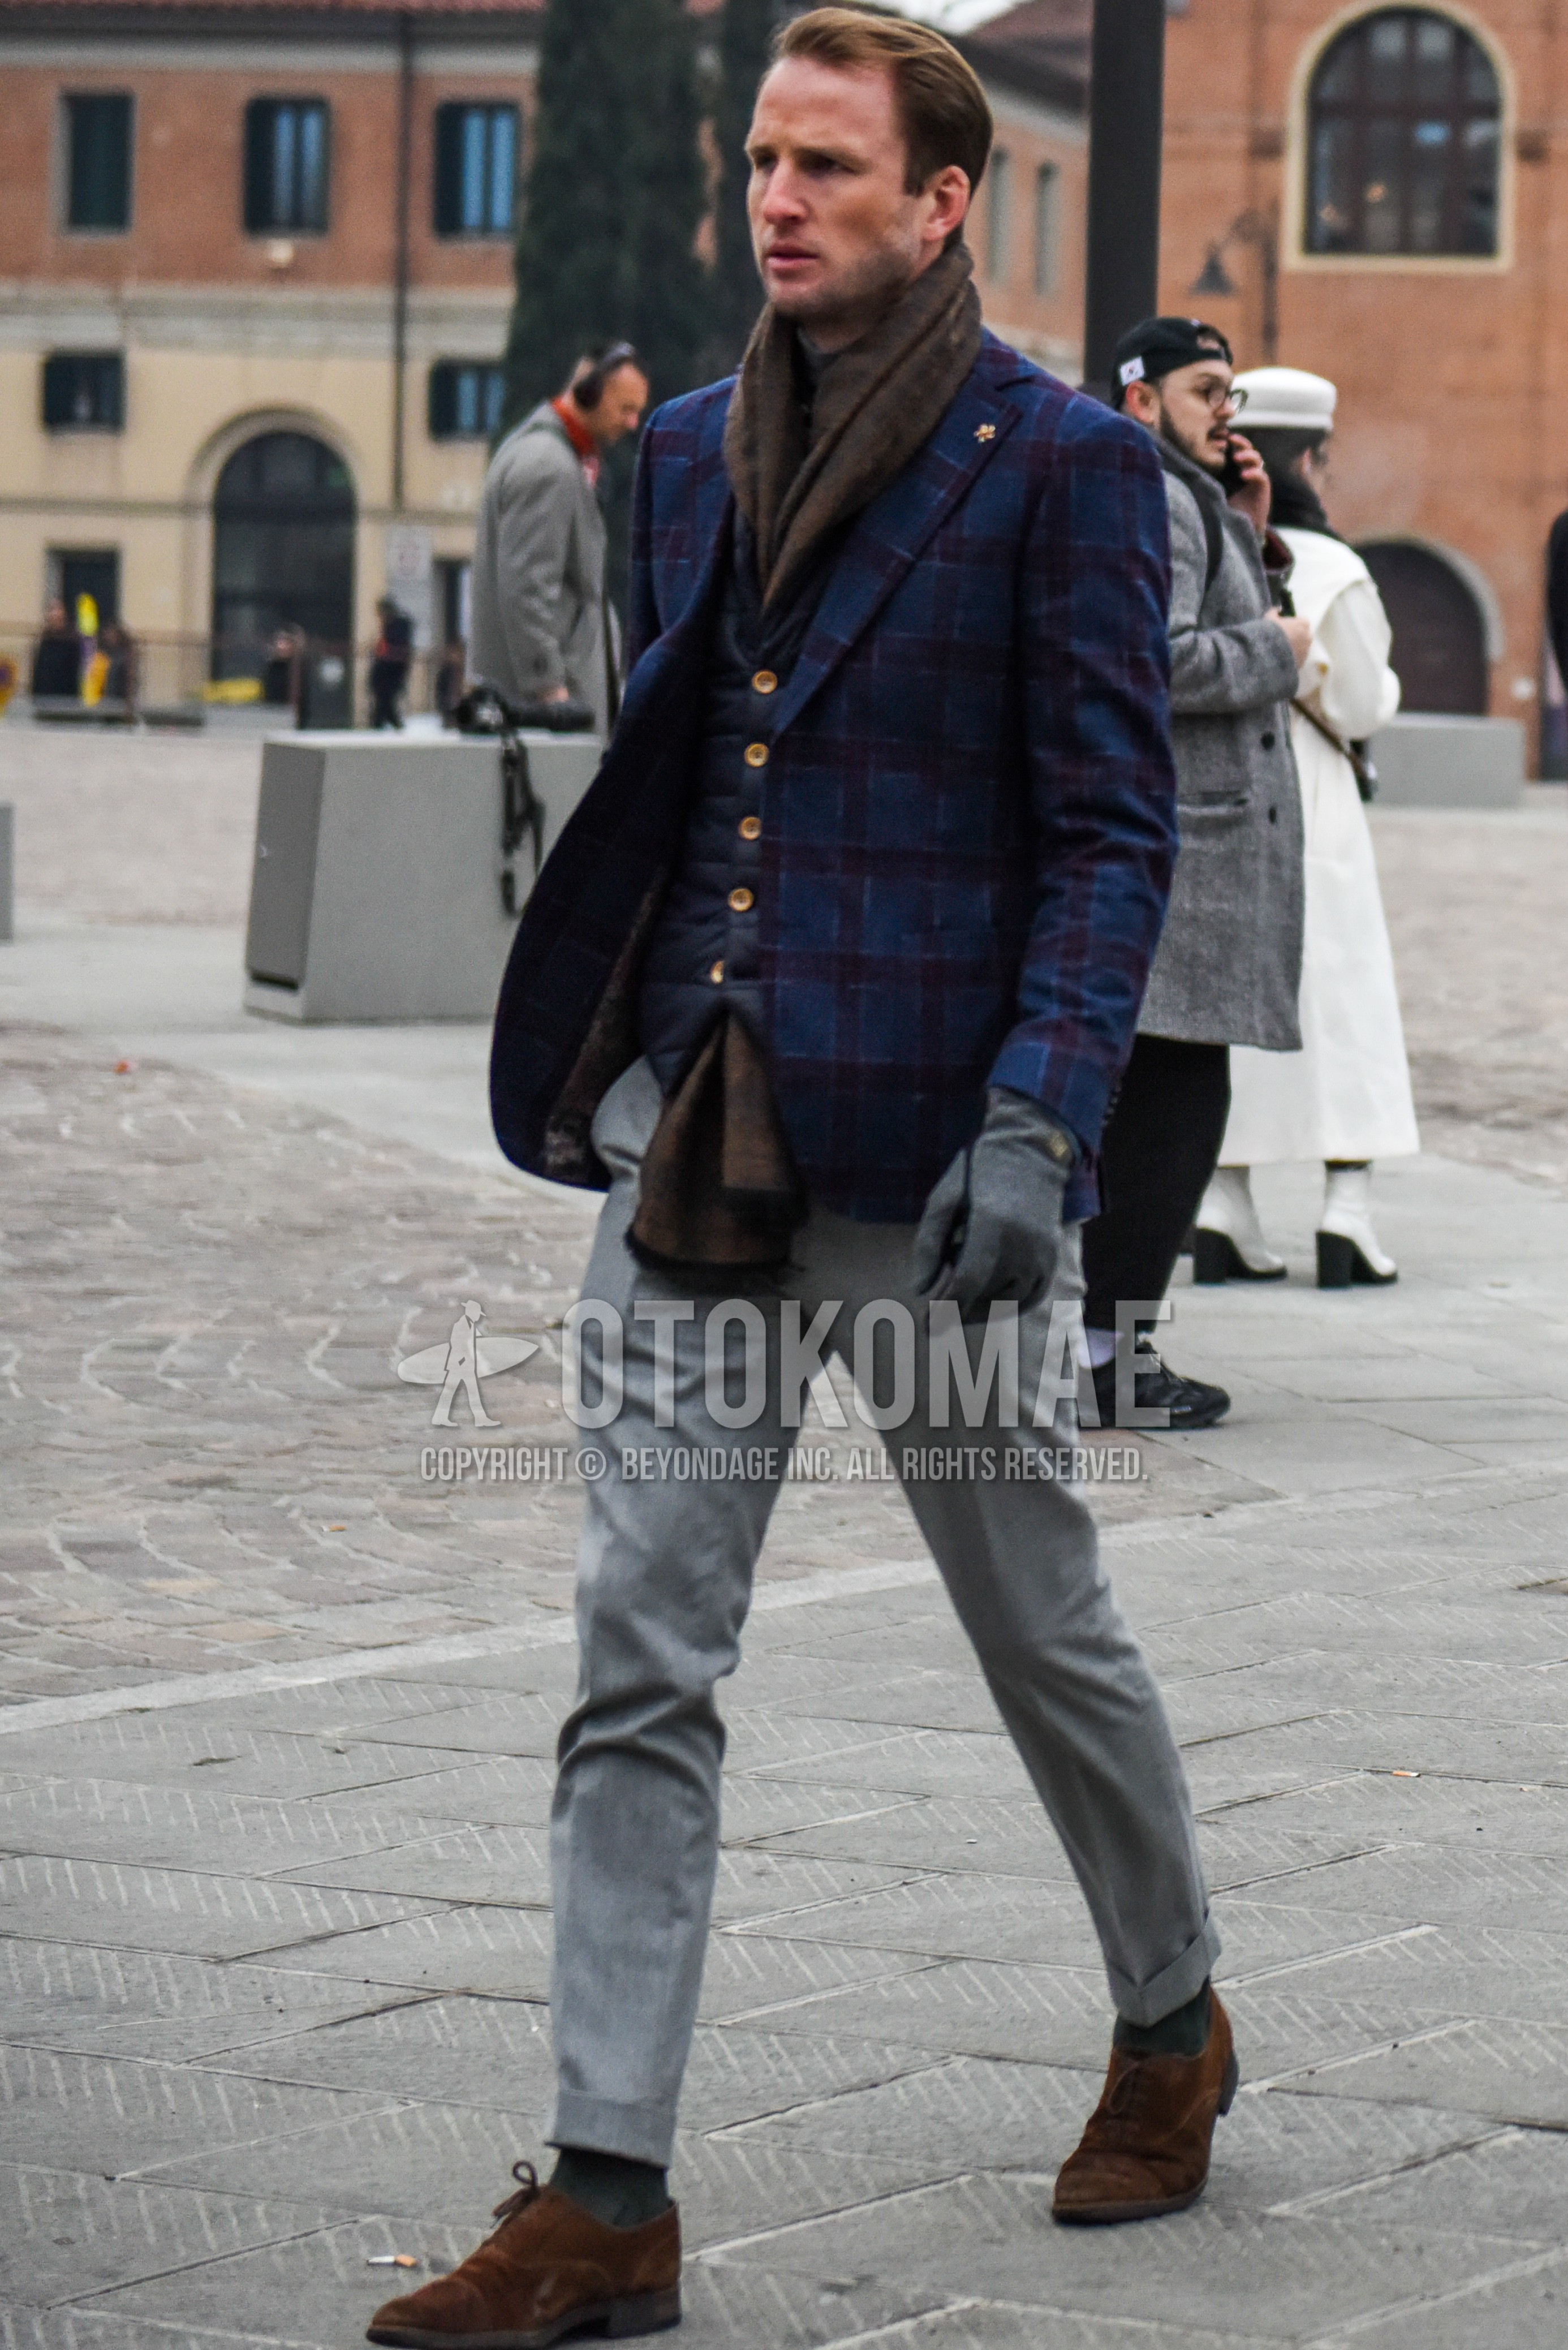 Men's autumn outfit with brown scarf scarf, navy check tailored jacket, navy check gilet, gray plain slacks, gray plain socks, brown suede shoes leather shoes.